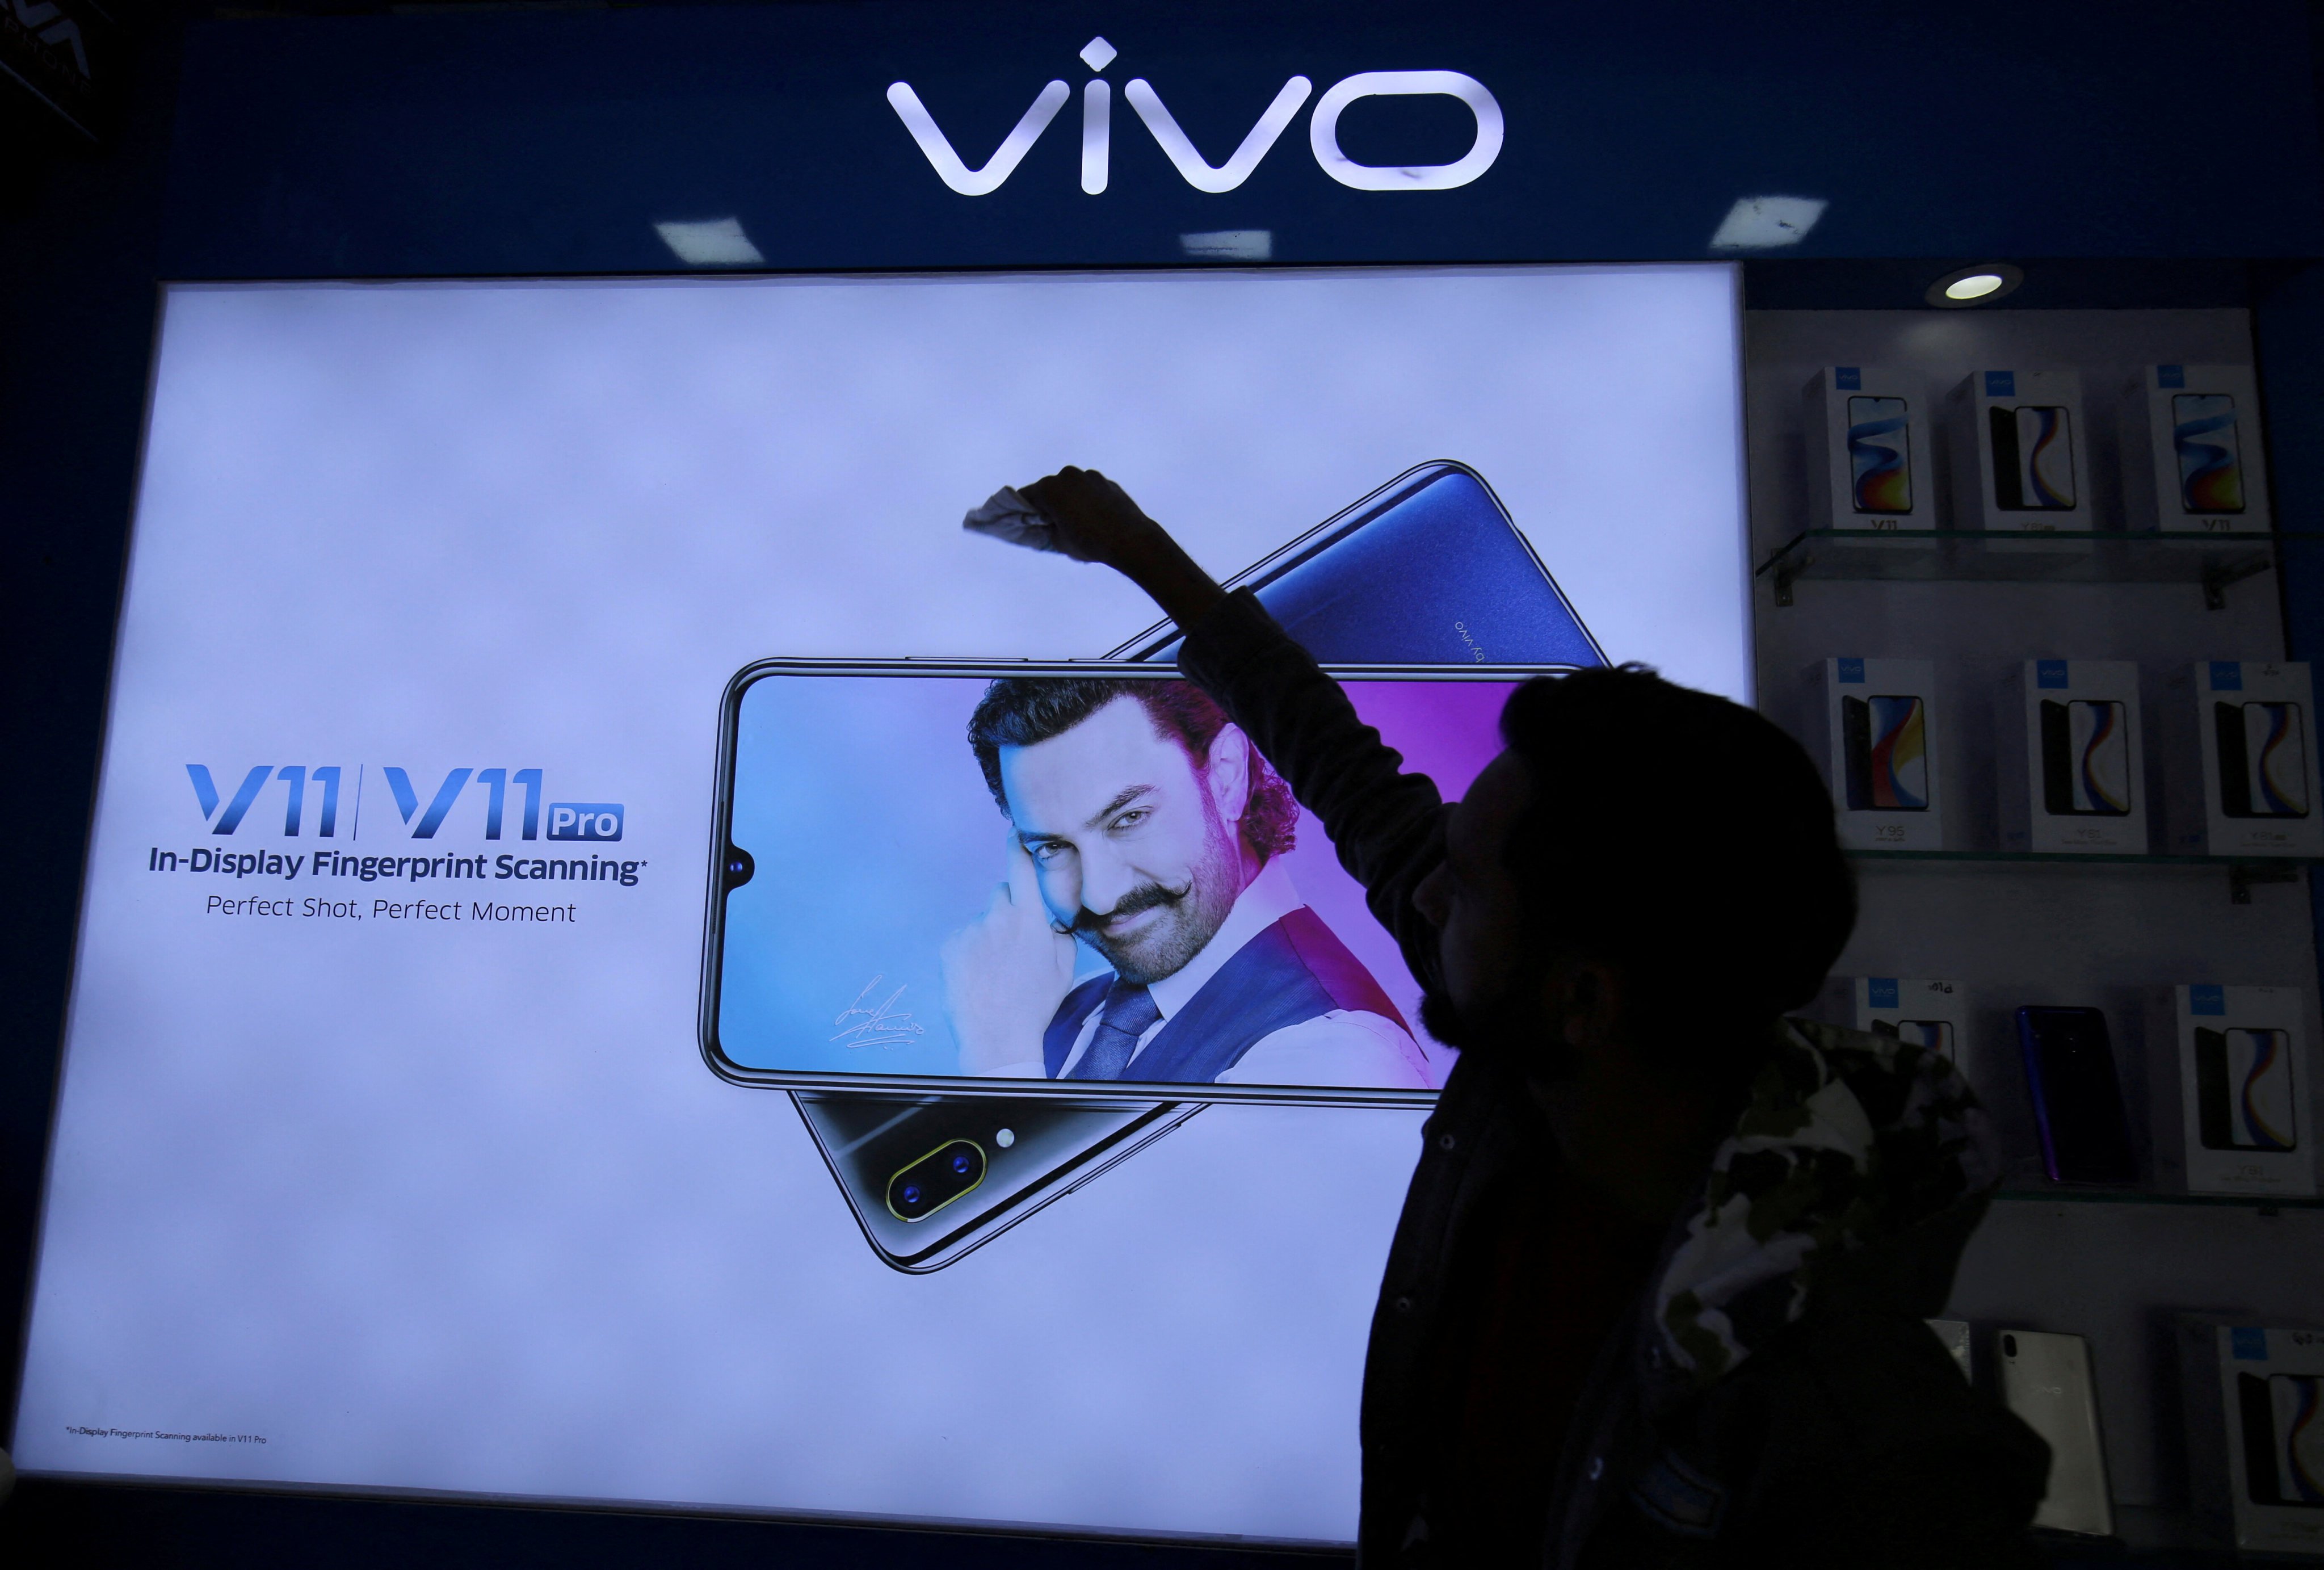 A man cleans a screen advertising a Vivo smartphone inside a shop in Ahmedabad, India in December 2018. Photo: Reuters